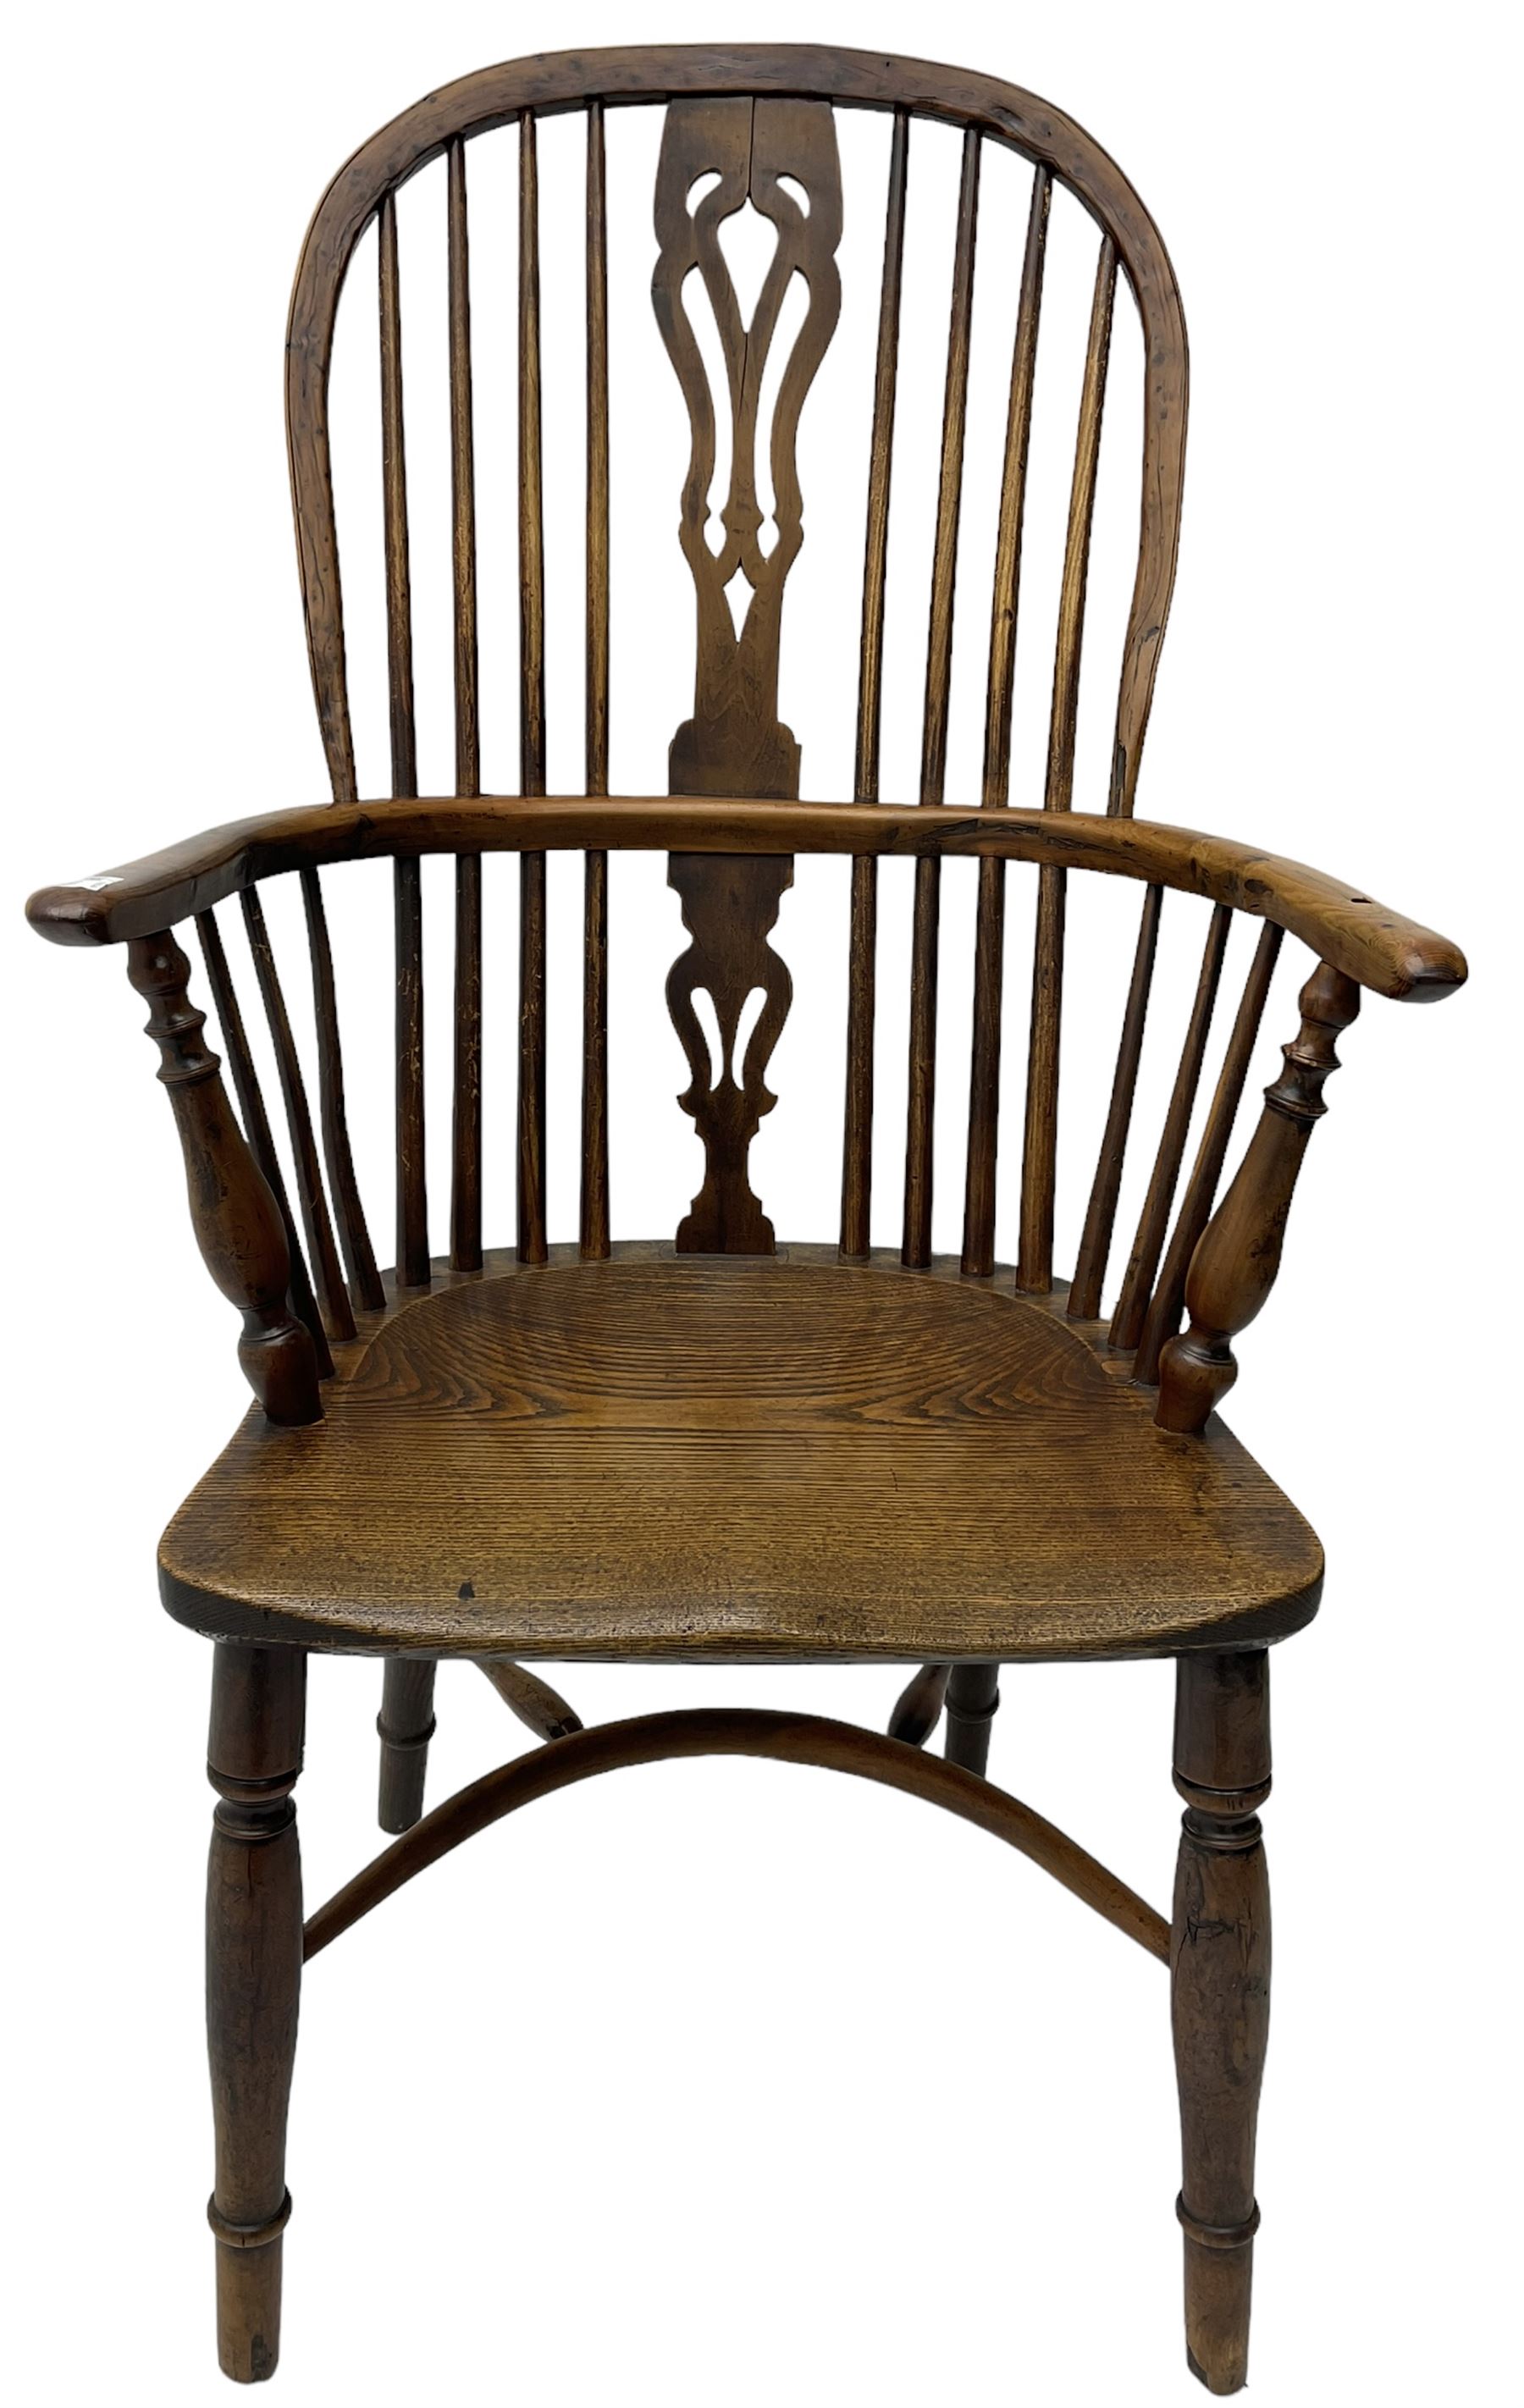 19th century yew wood and elm Windsor chair - Image 4 of 7